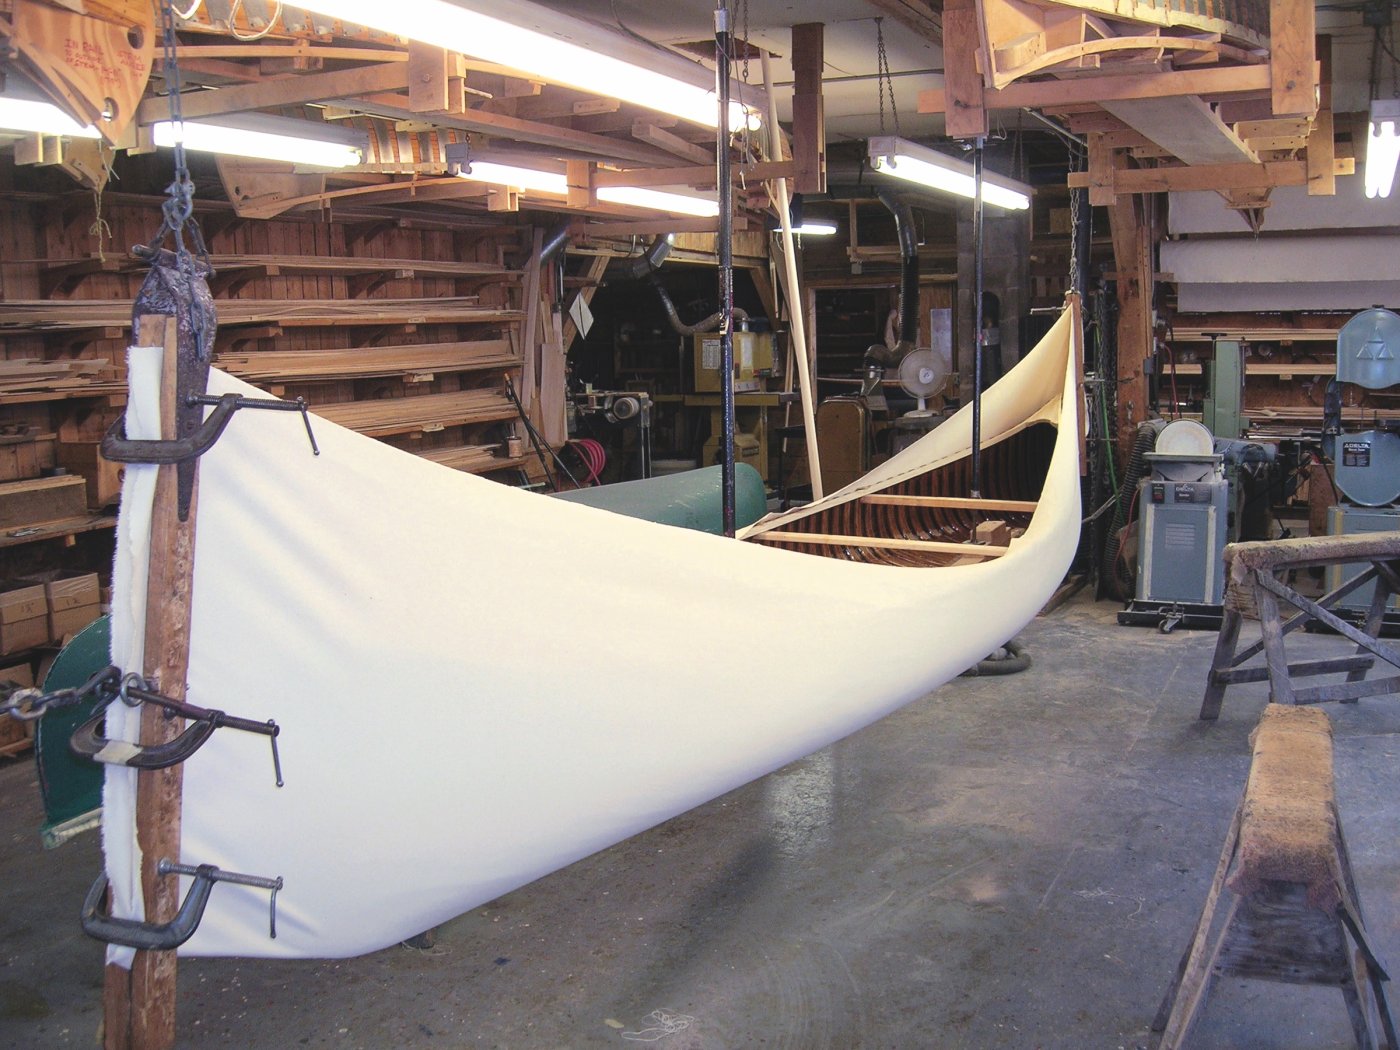 The wooden hull of a canoe being inserted into a canvas envelope.